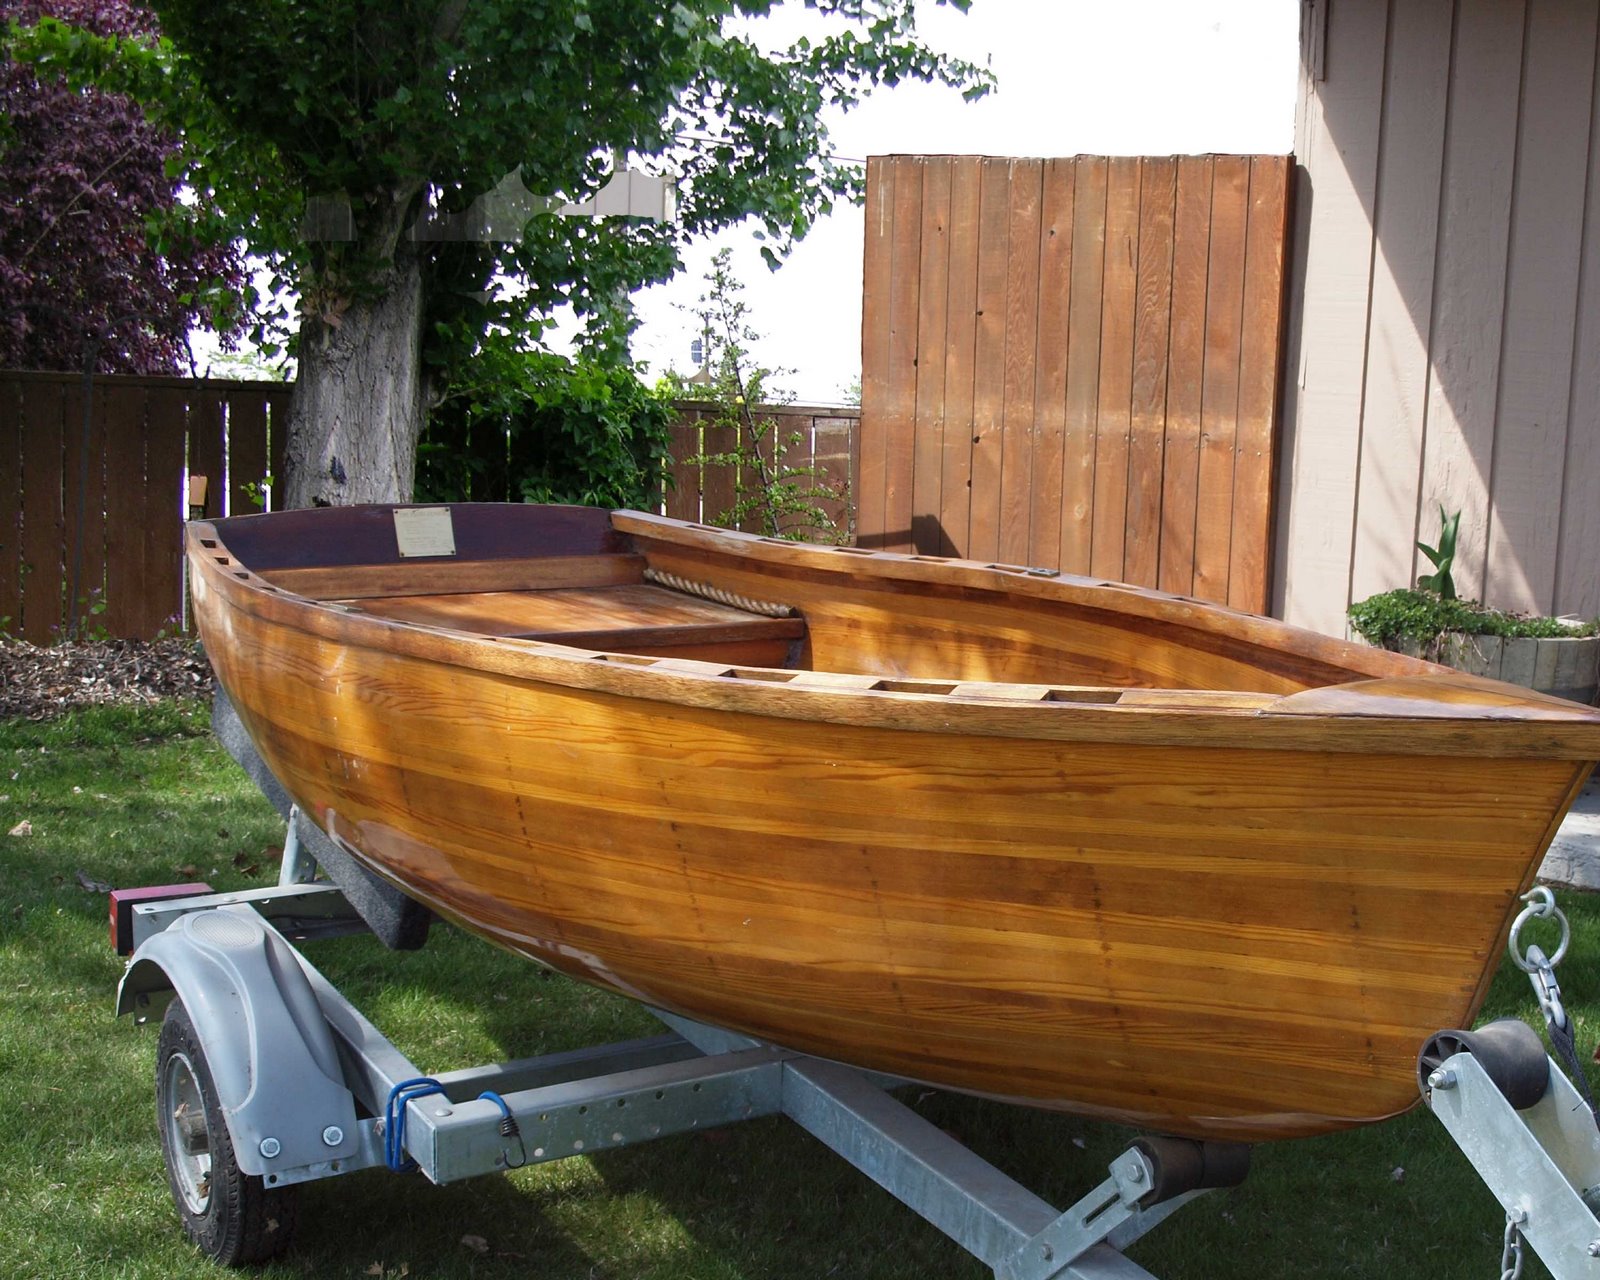 jay: wooden rowing boat diy kits for sale how to building